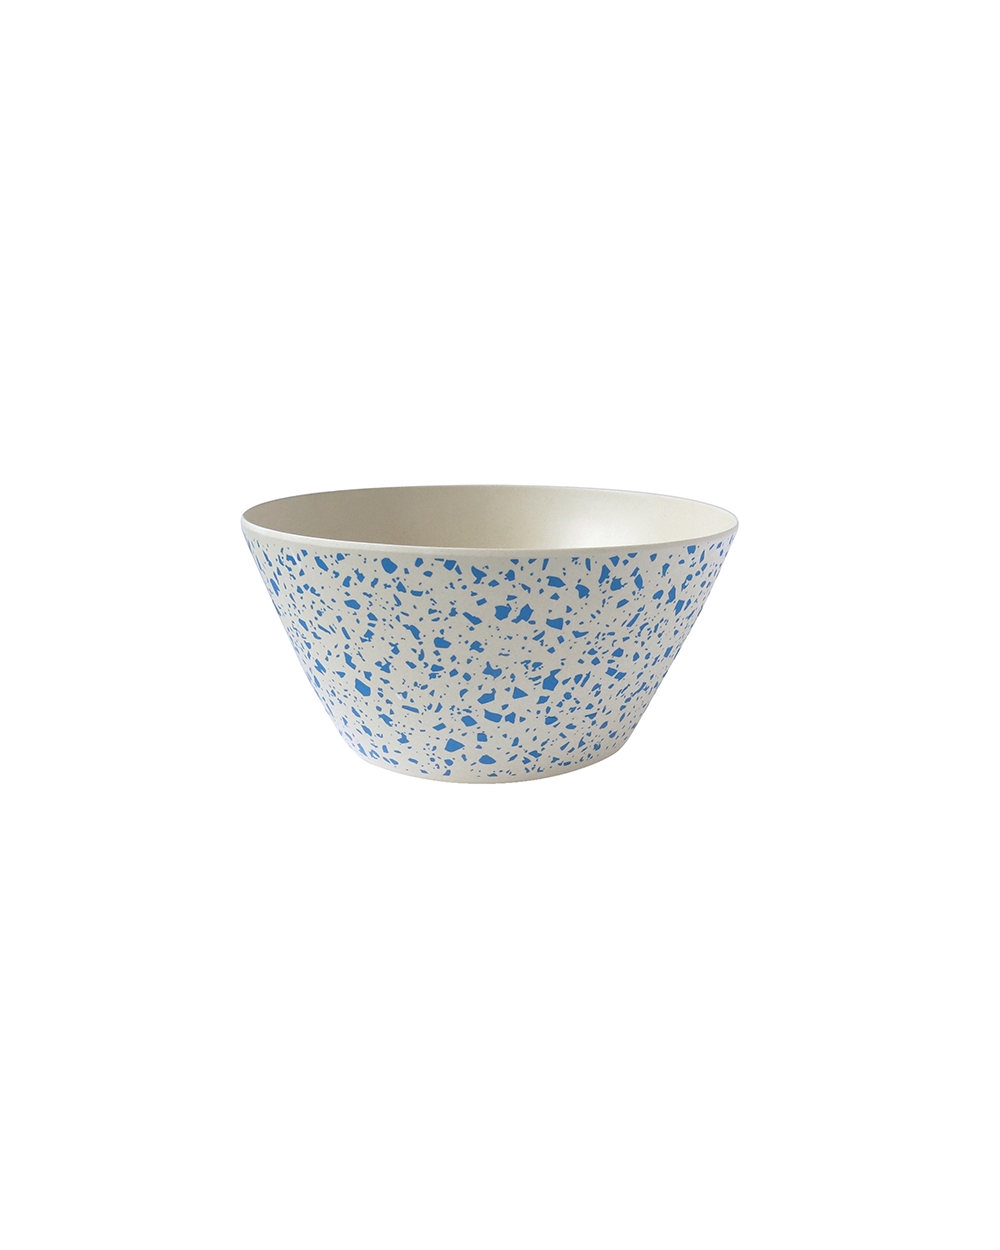 5.5" Cereal Bowl - Lido